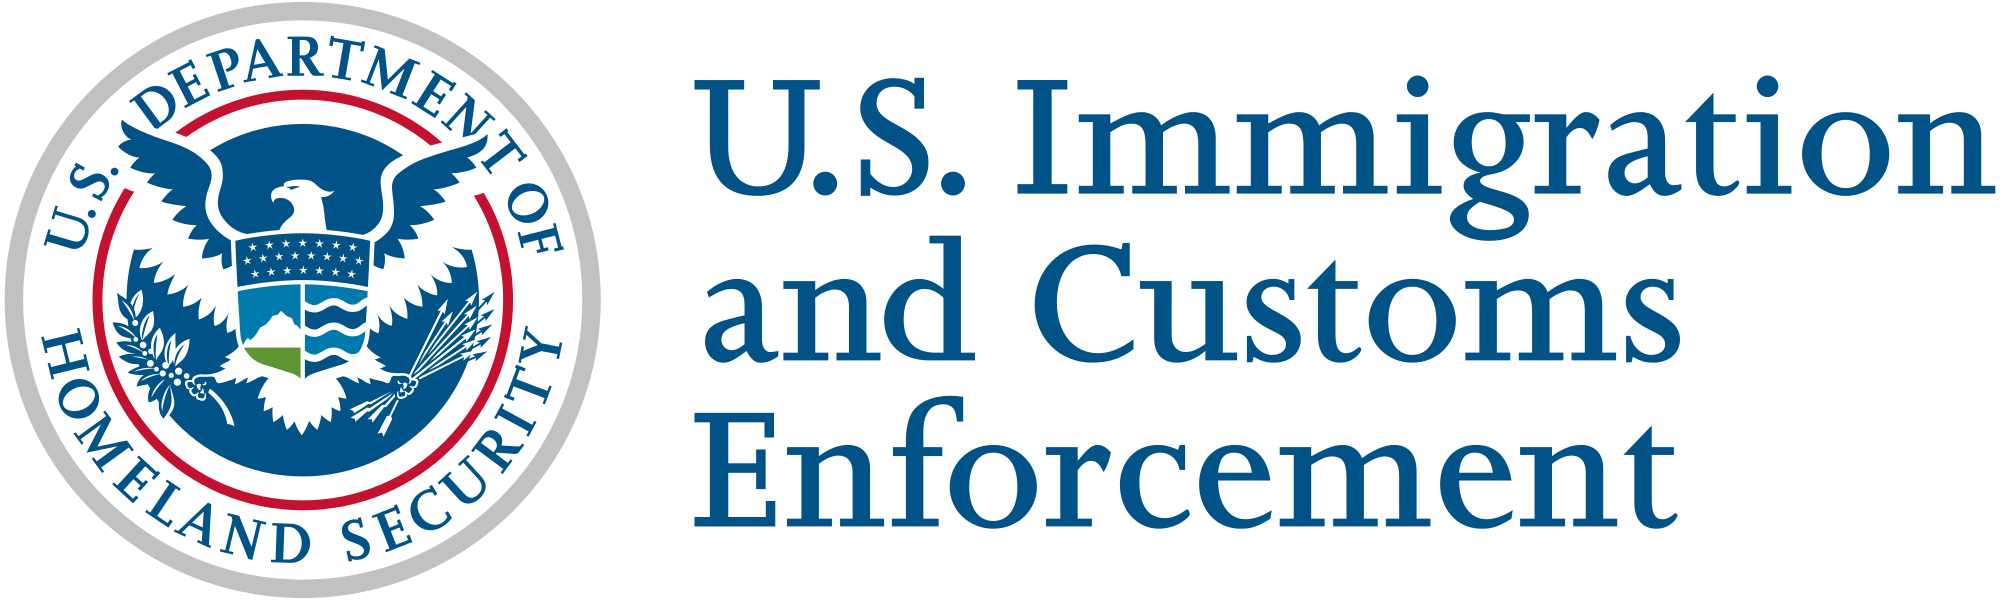 Ice Logo - File:U.S. Immigration and Customs Enforcement (ICE) Logo.svg ...